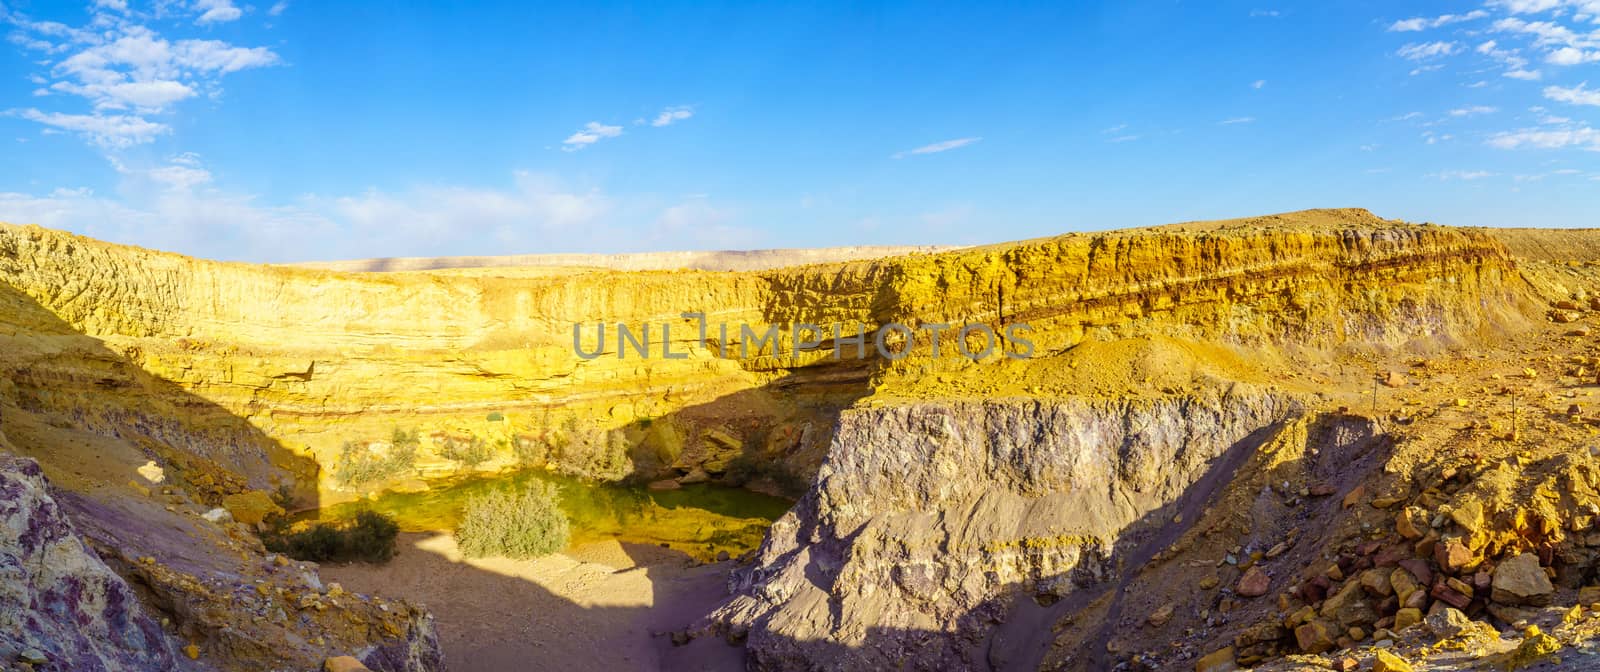 Panoramic view of a water hole and layered rock formation, along the Ramon Colors Route, in Makhtesh Ramon (Ramon Crater), the Negev desert, southern Israel